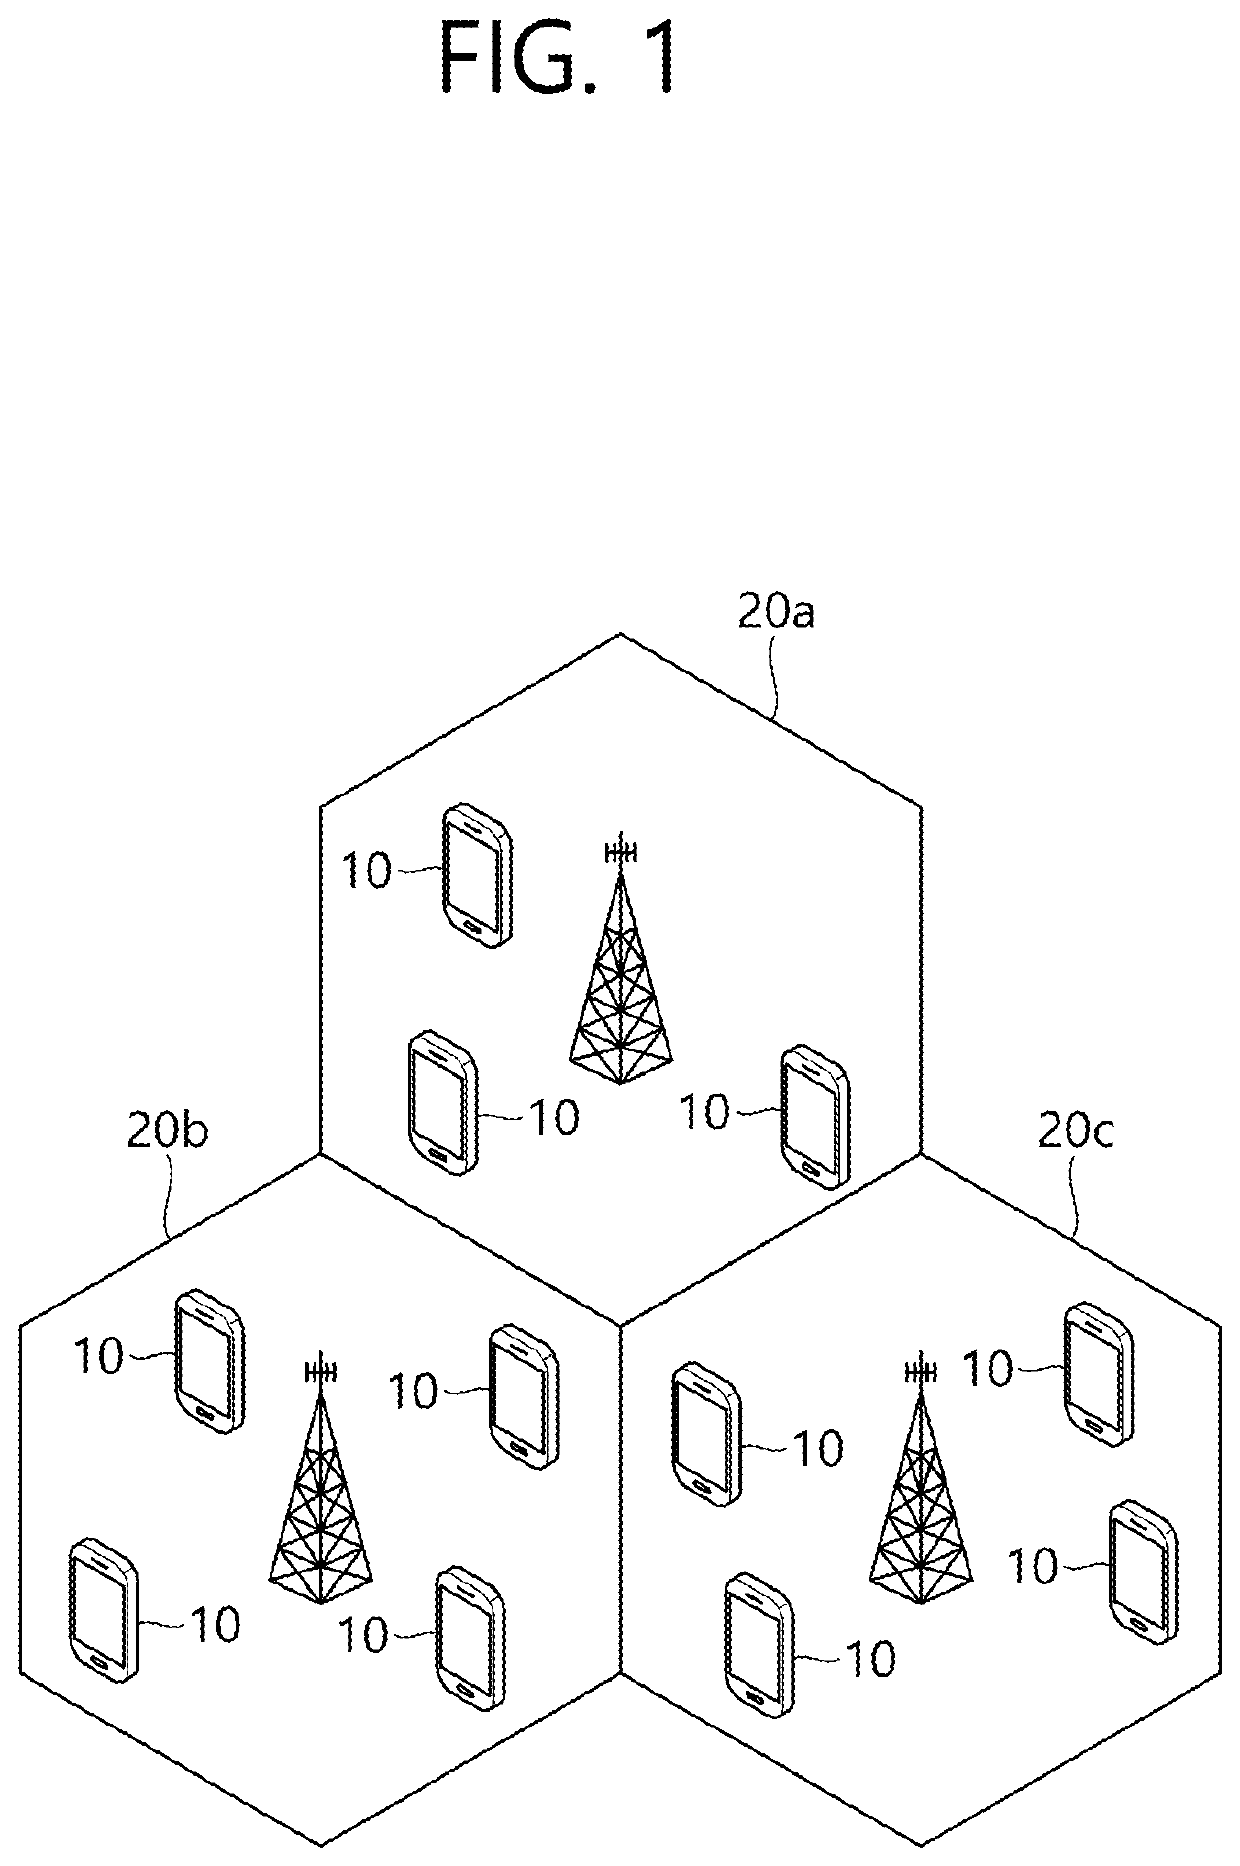 Method for determining a transport block size and wireless device